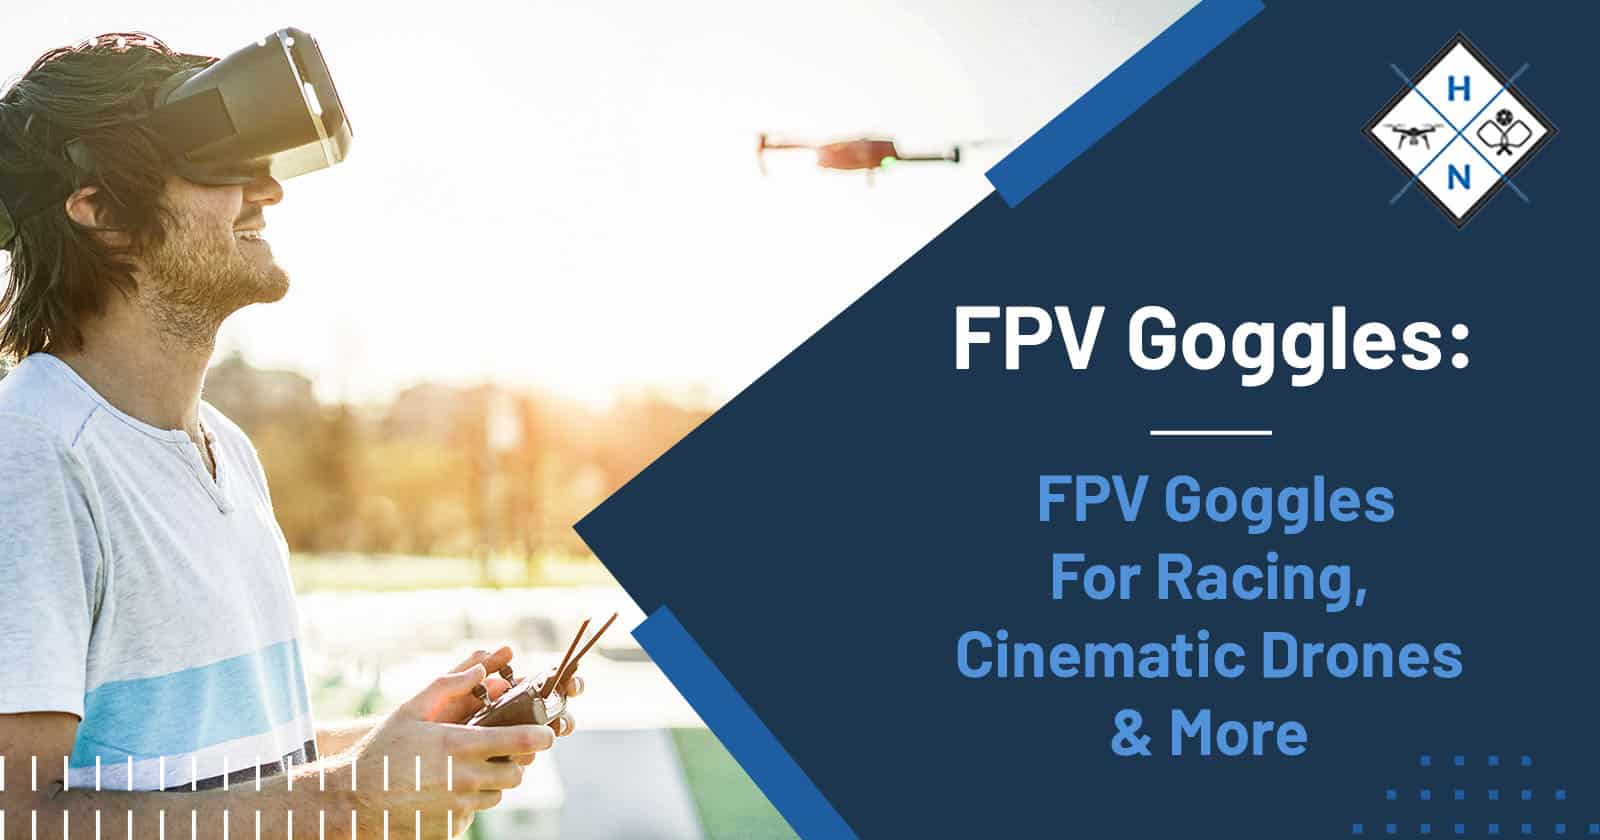 FPV Goggles: FPV Goggles For Racing, Cinematic Drones & More